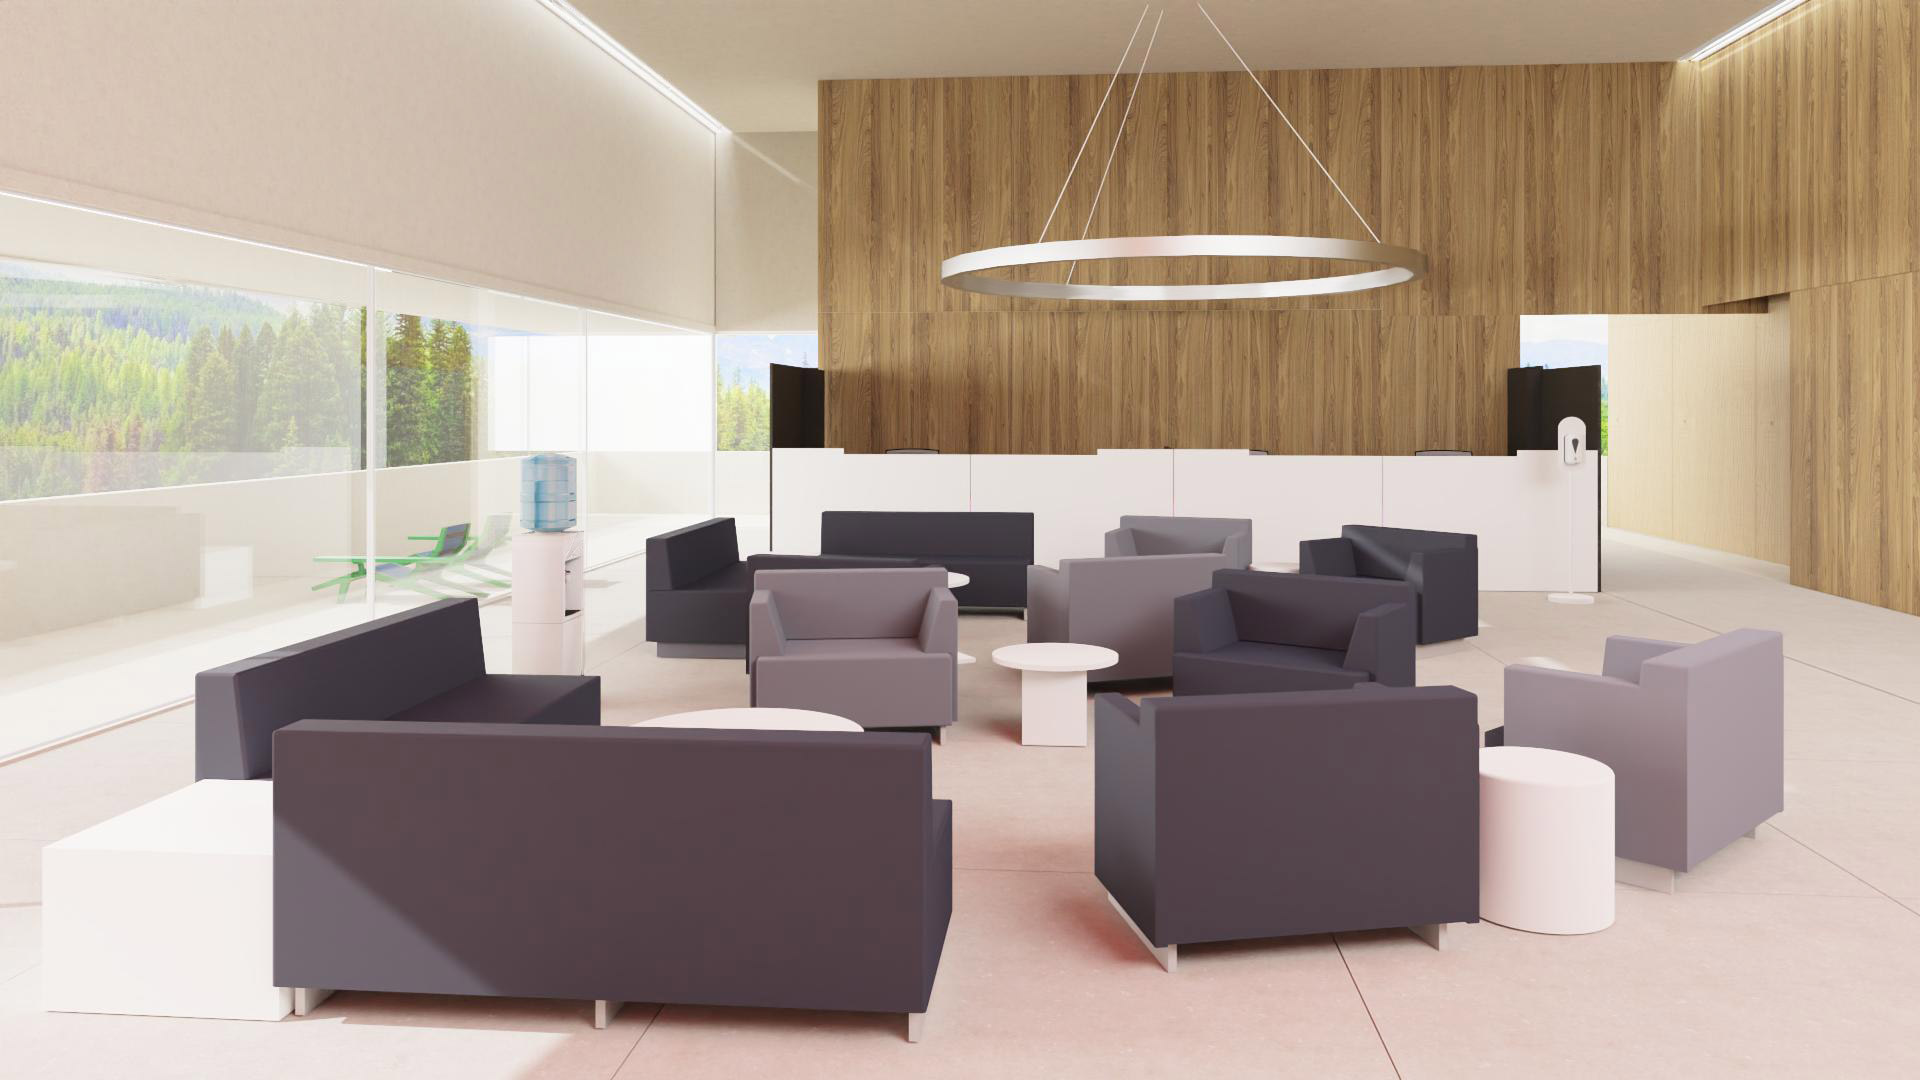 Product render in the interior